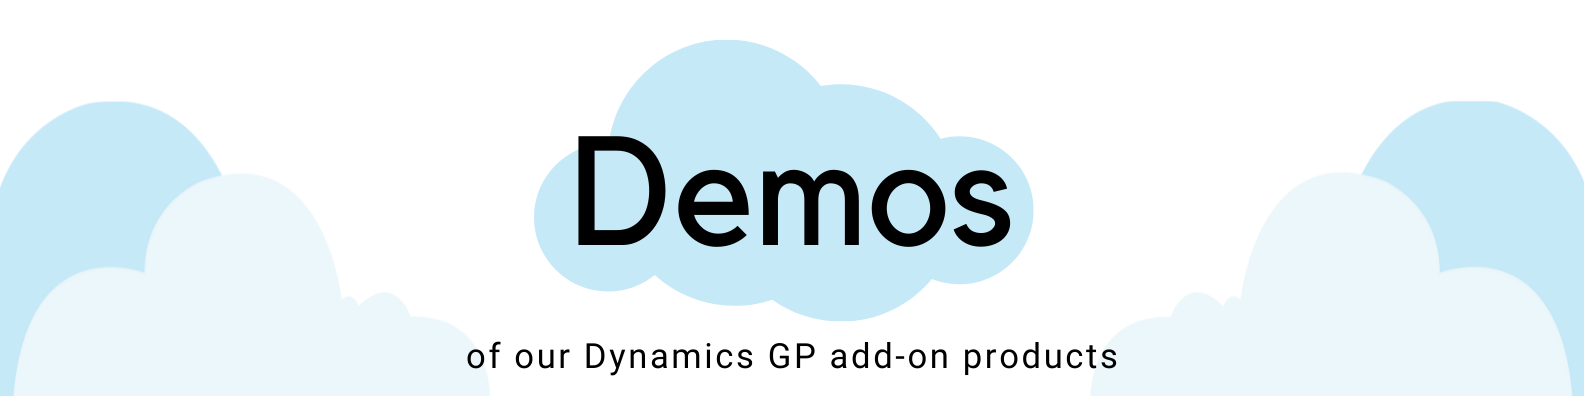 Add On Products for Dynamics GP Demos Banner